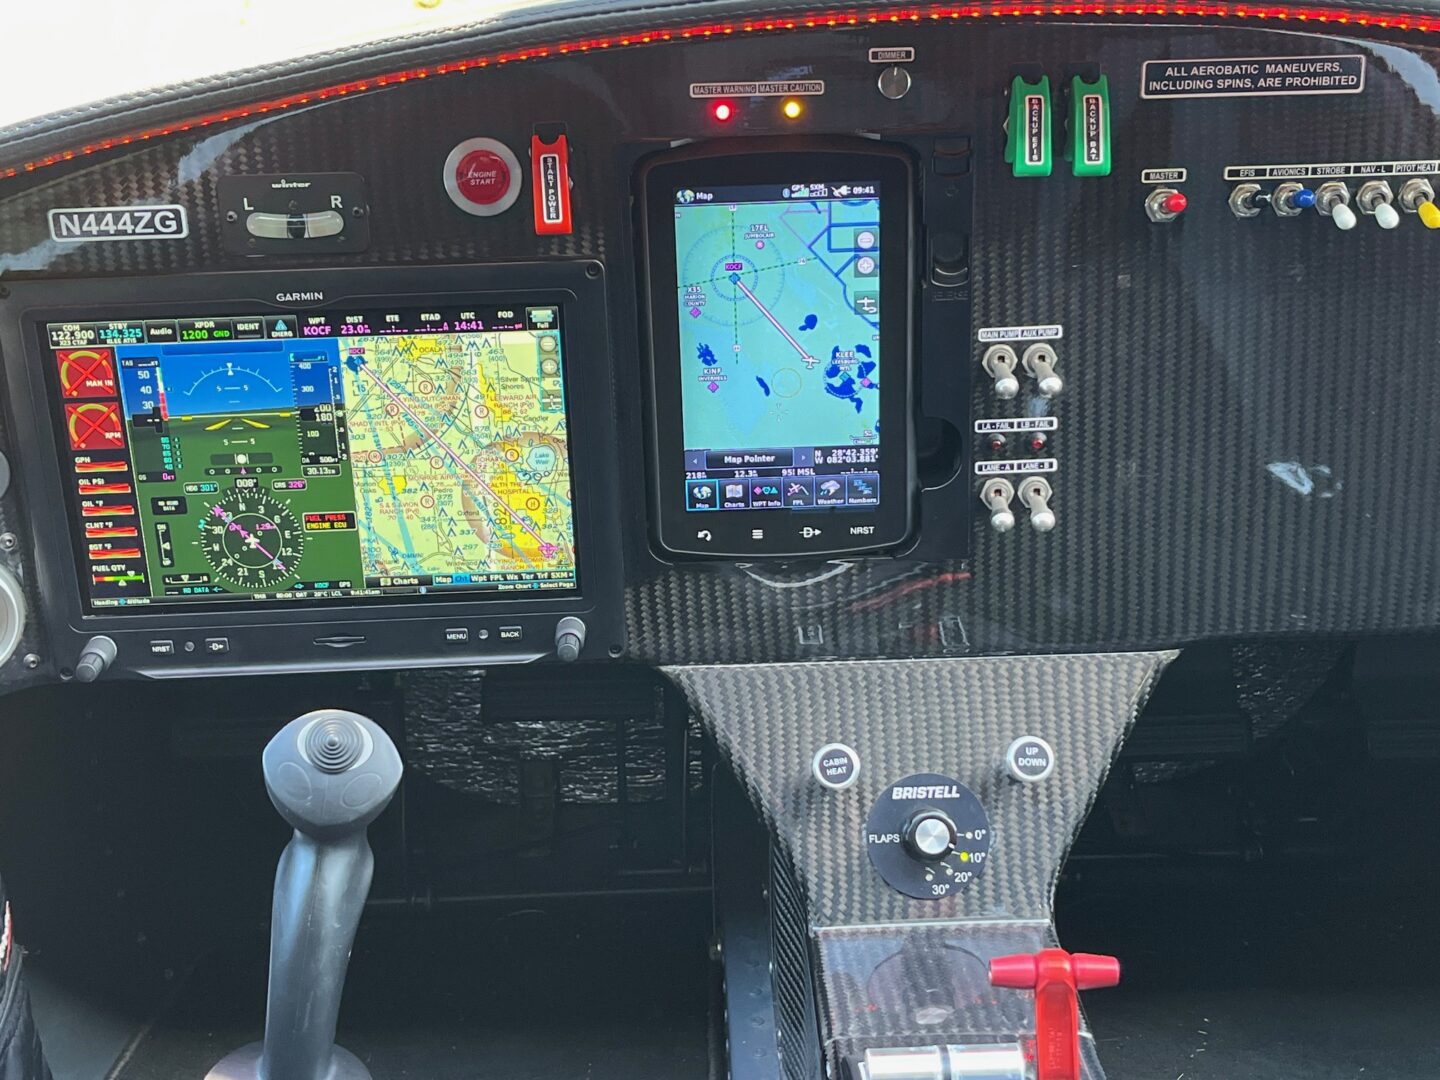 A view of the cockpit of an airplane with gps and navigation.